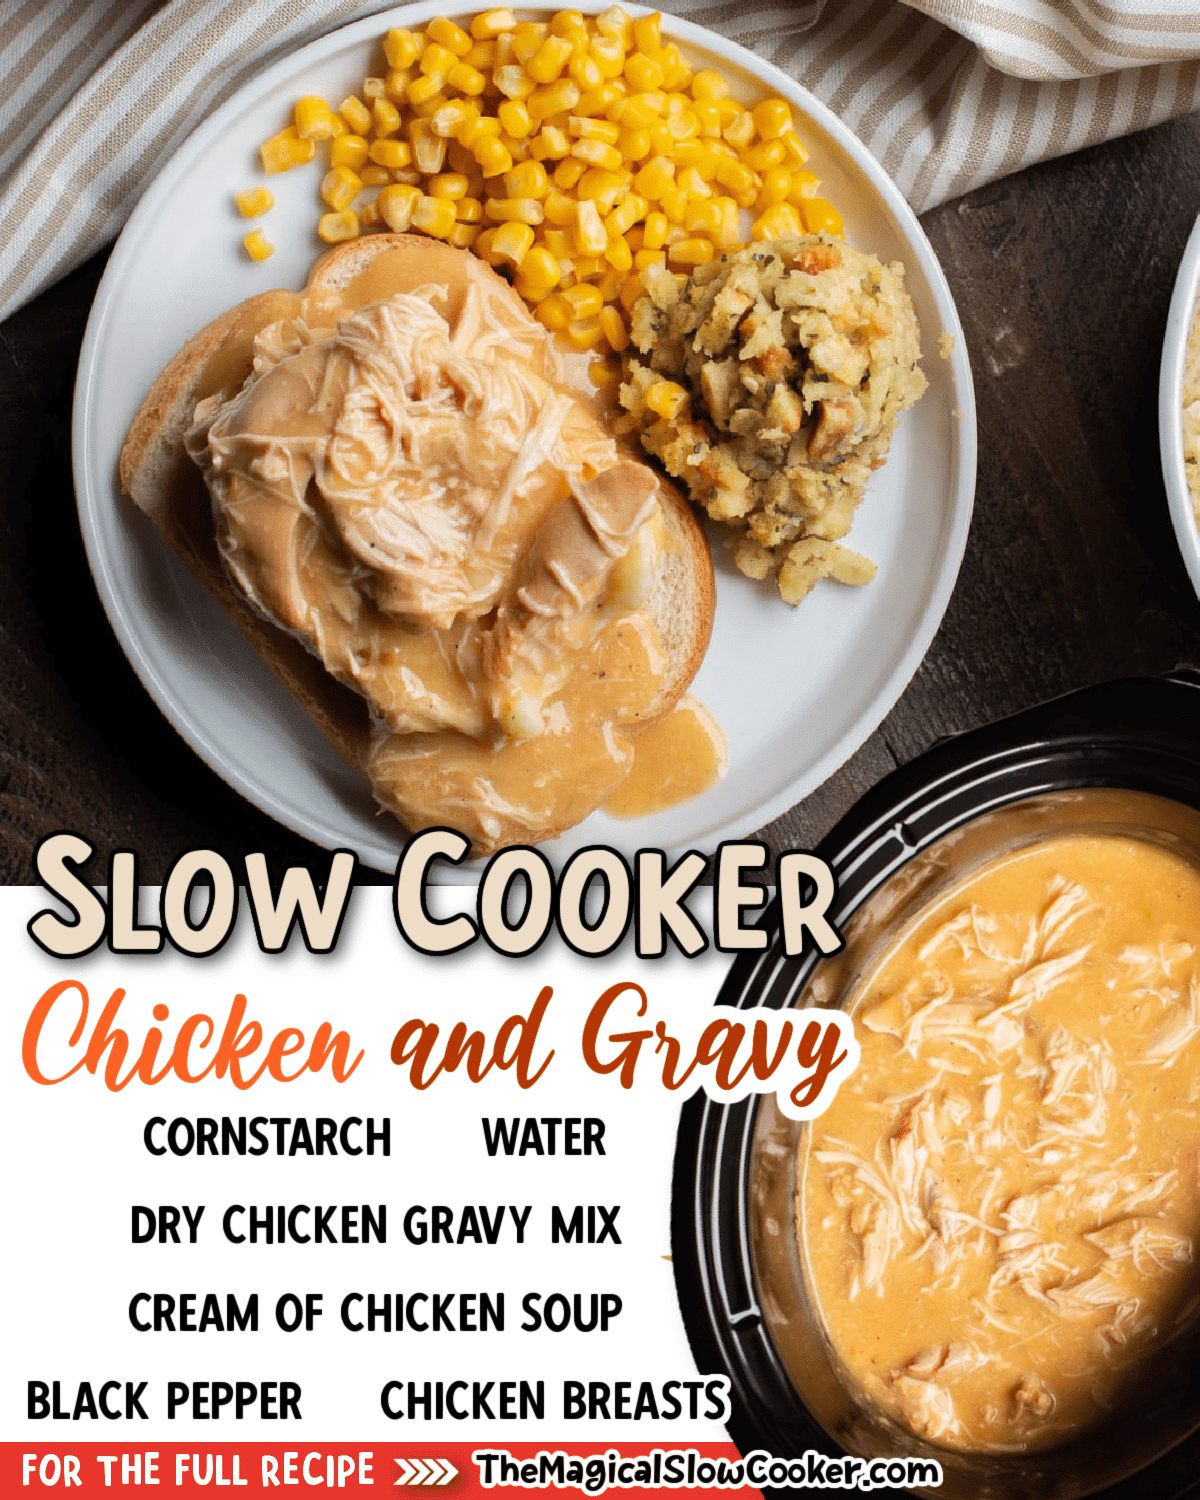 Collage of chicken and gravy images with with text of ingredients.